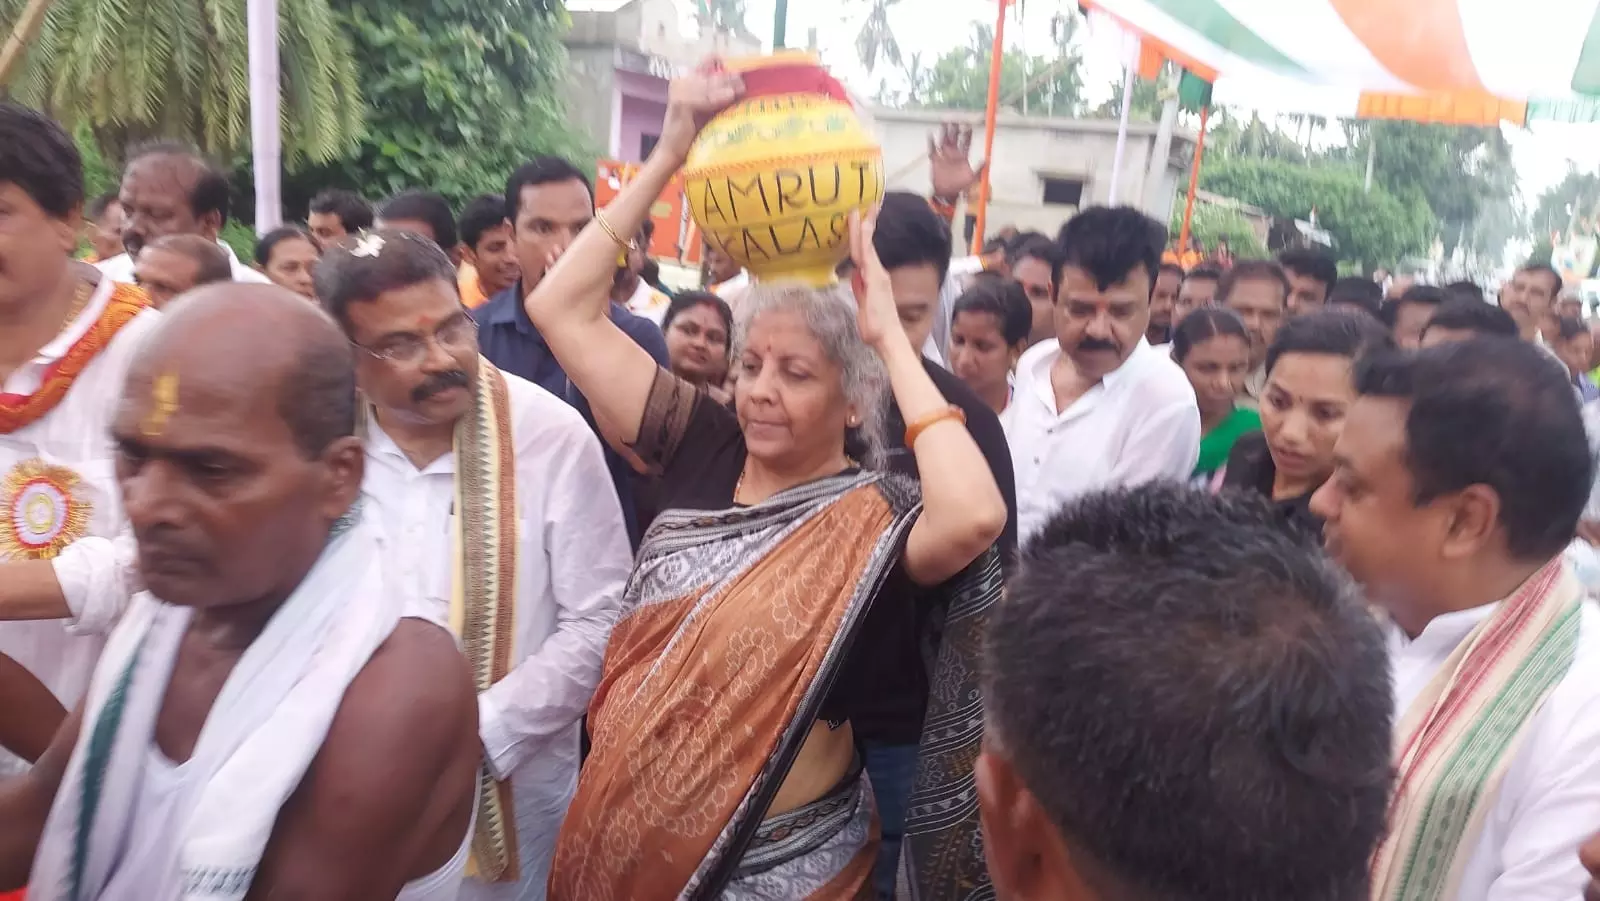 Remove all traces of colonial mindset: Nirmala Sitharaman takes Panch Pran pledge in Odisha